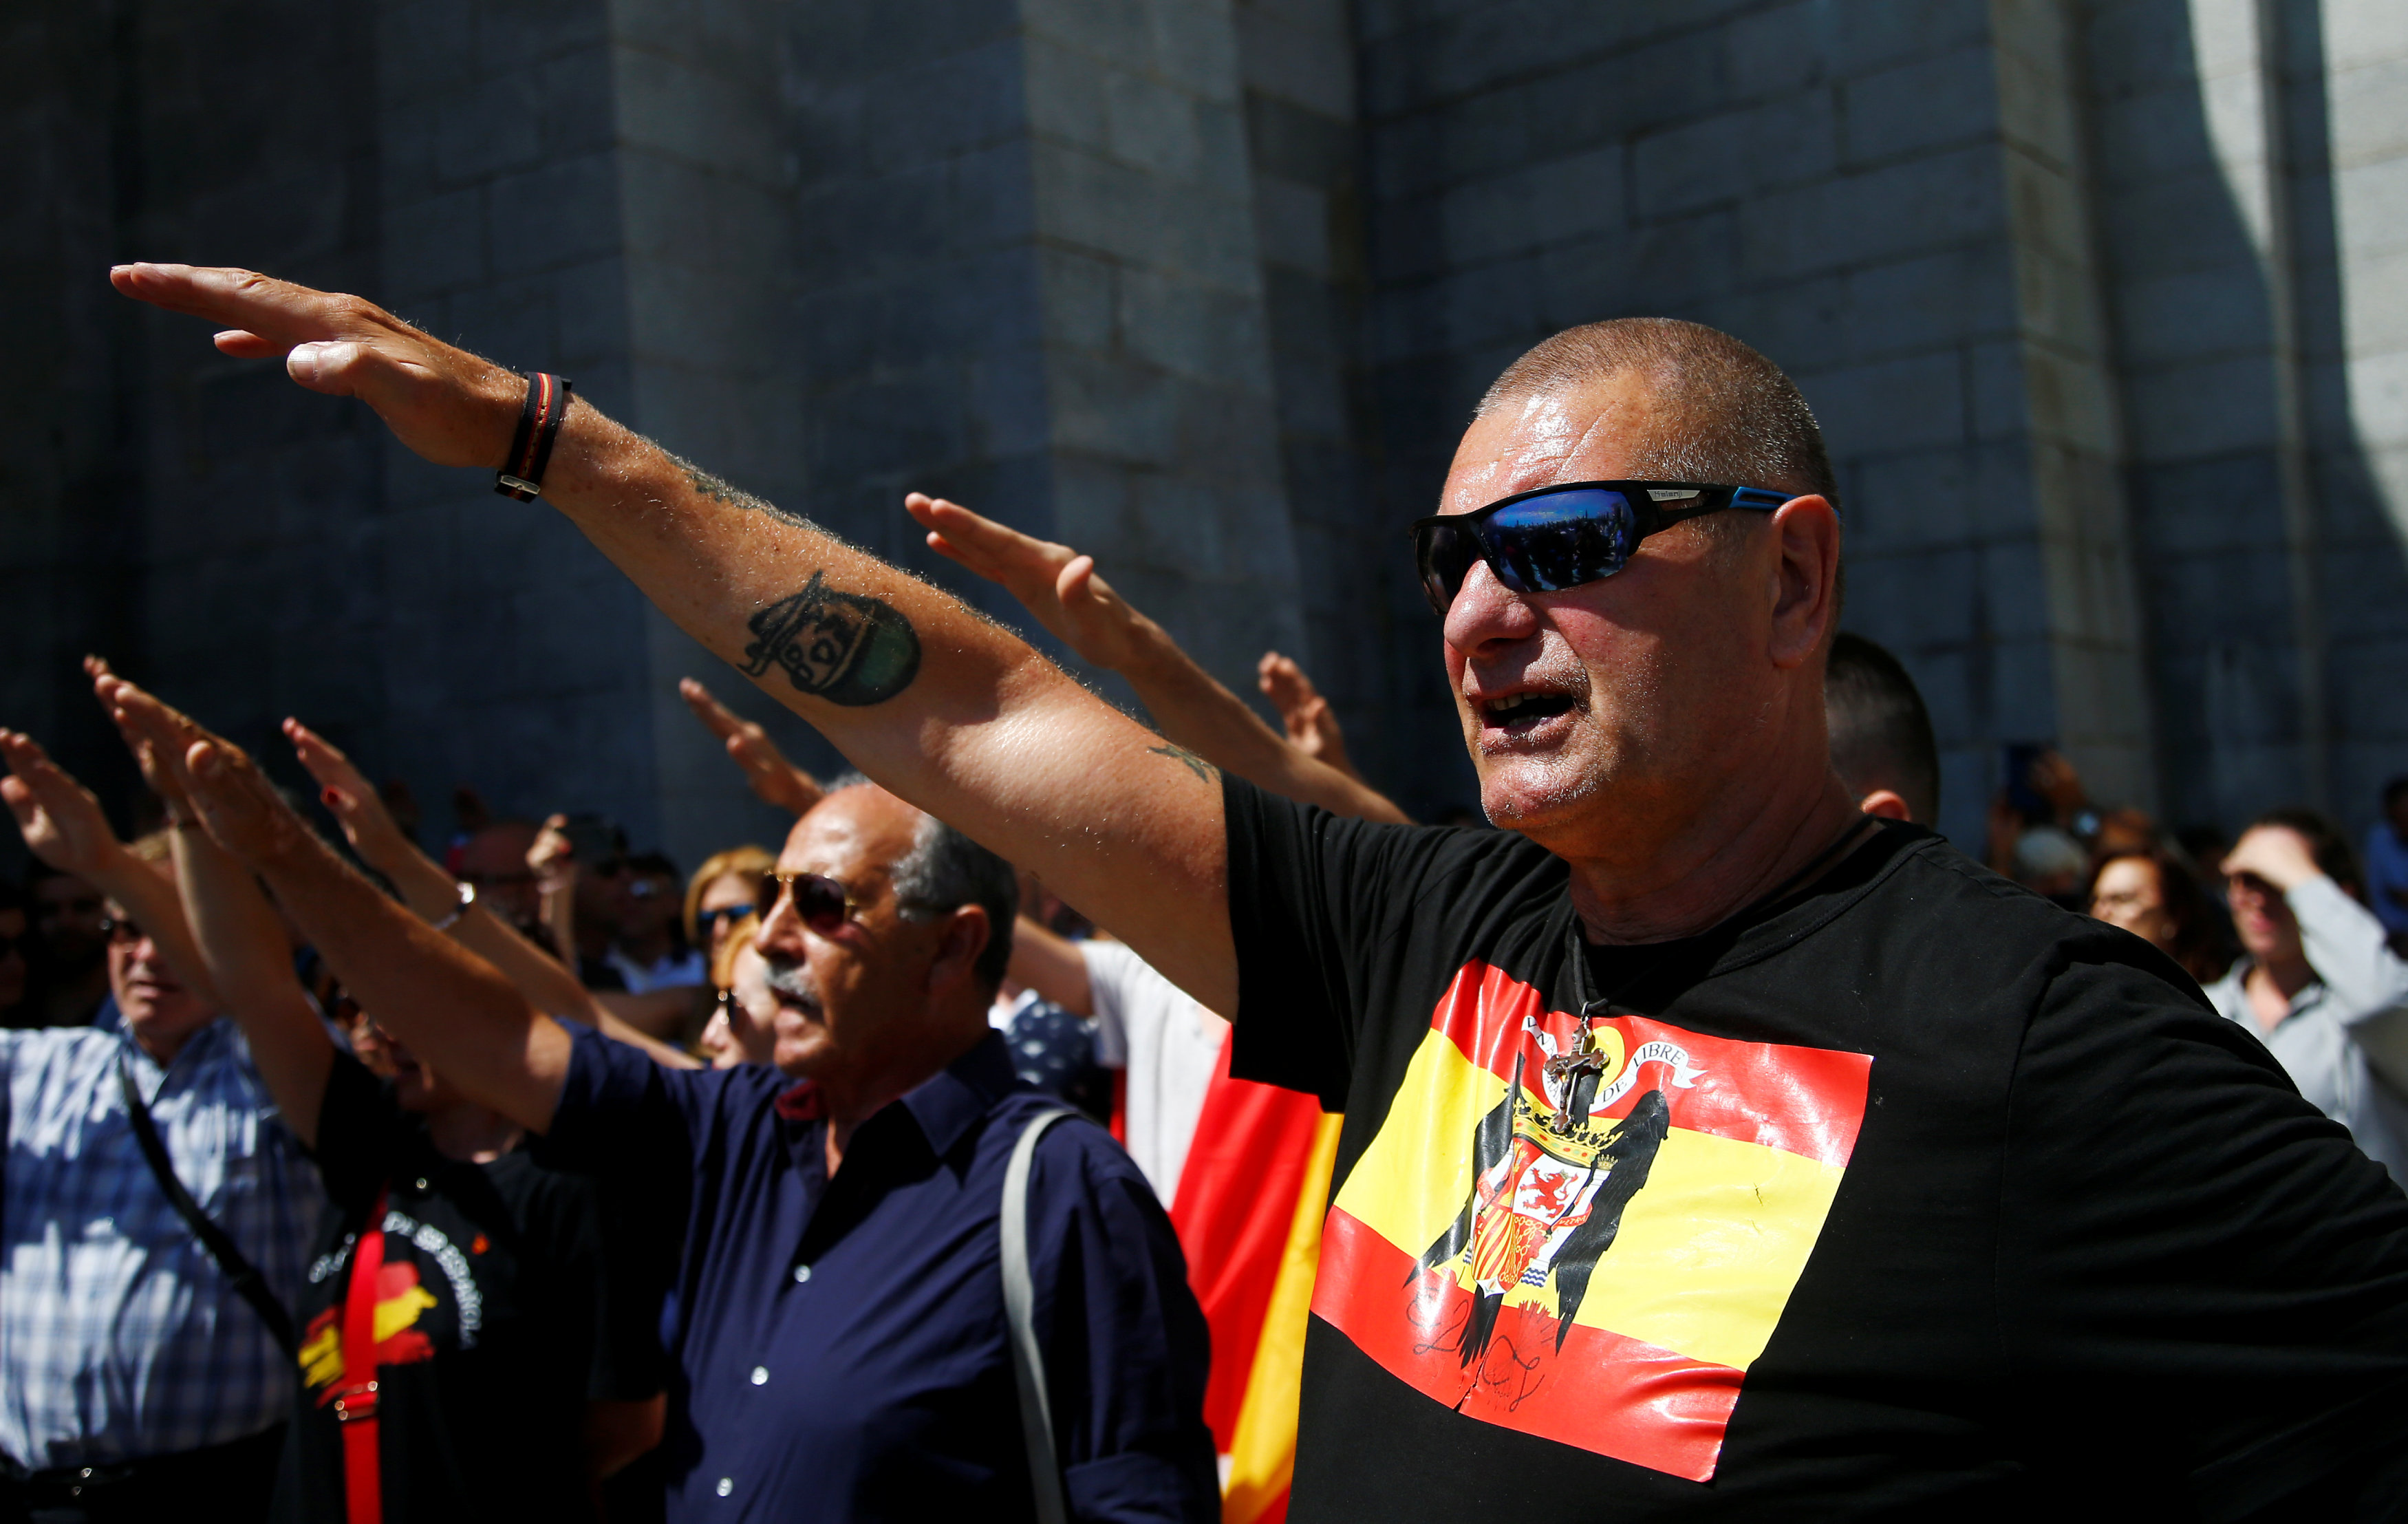 People make fascist salute at demonstration against plans to remove Franco from the Valle de los Caidos (by REUTERS/Javier Barbancho)